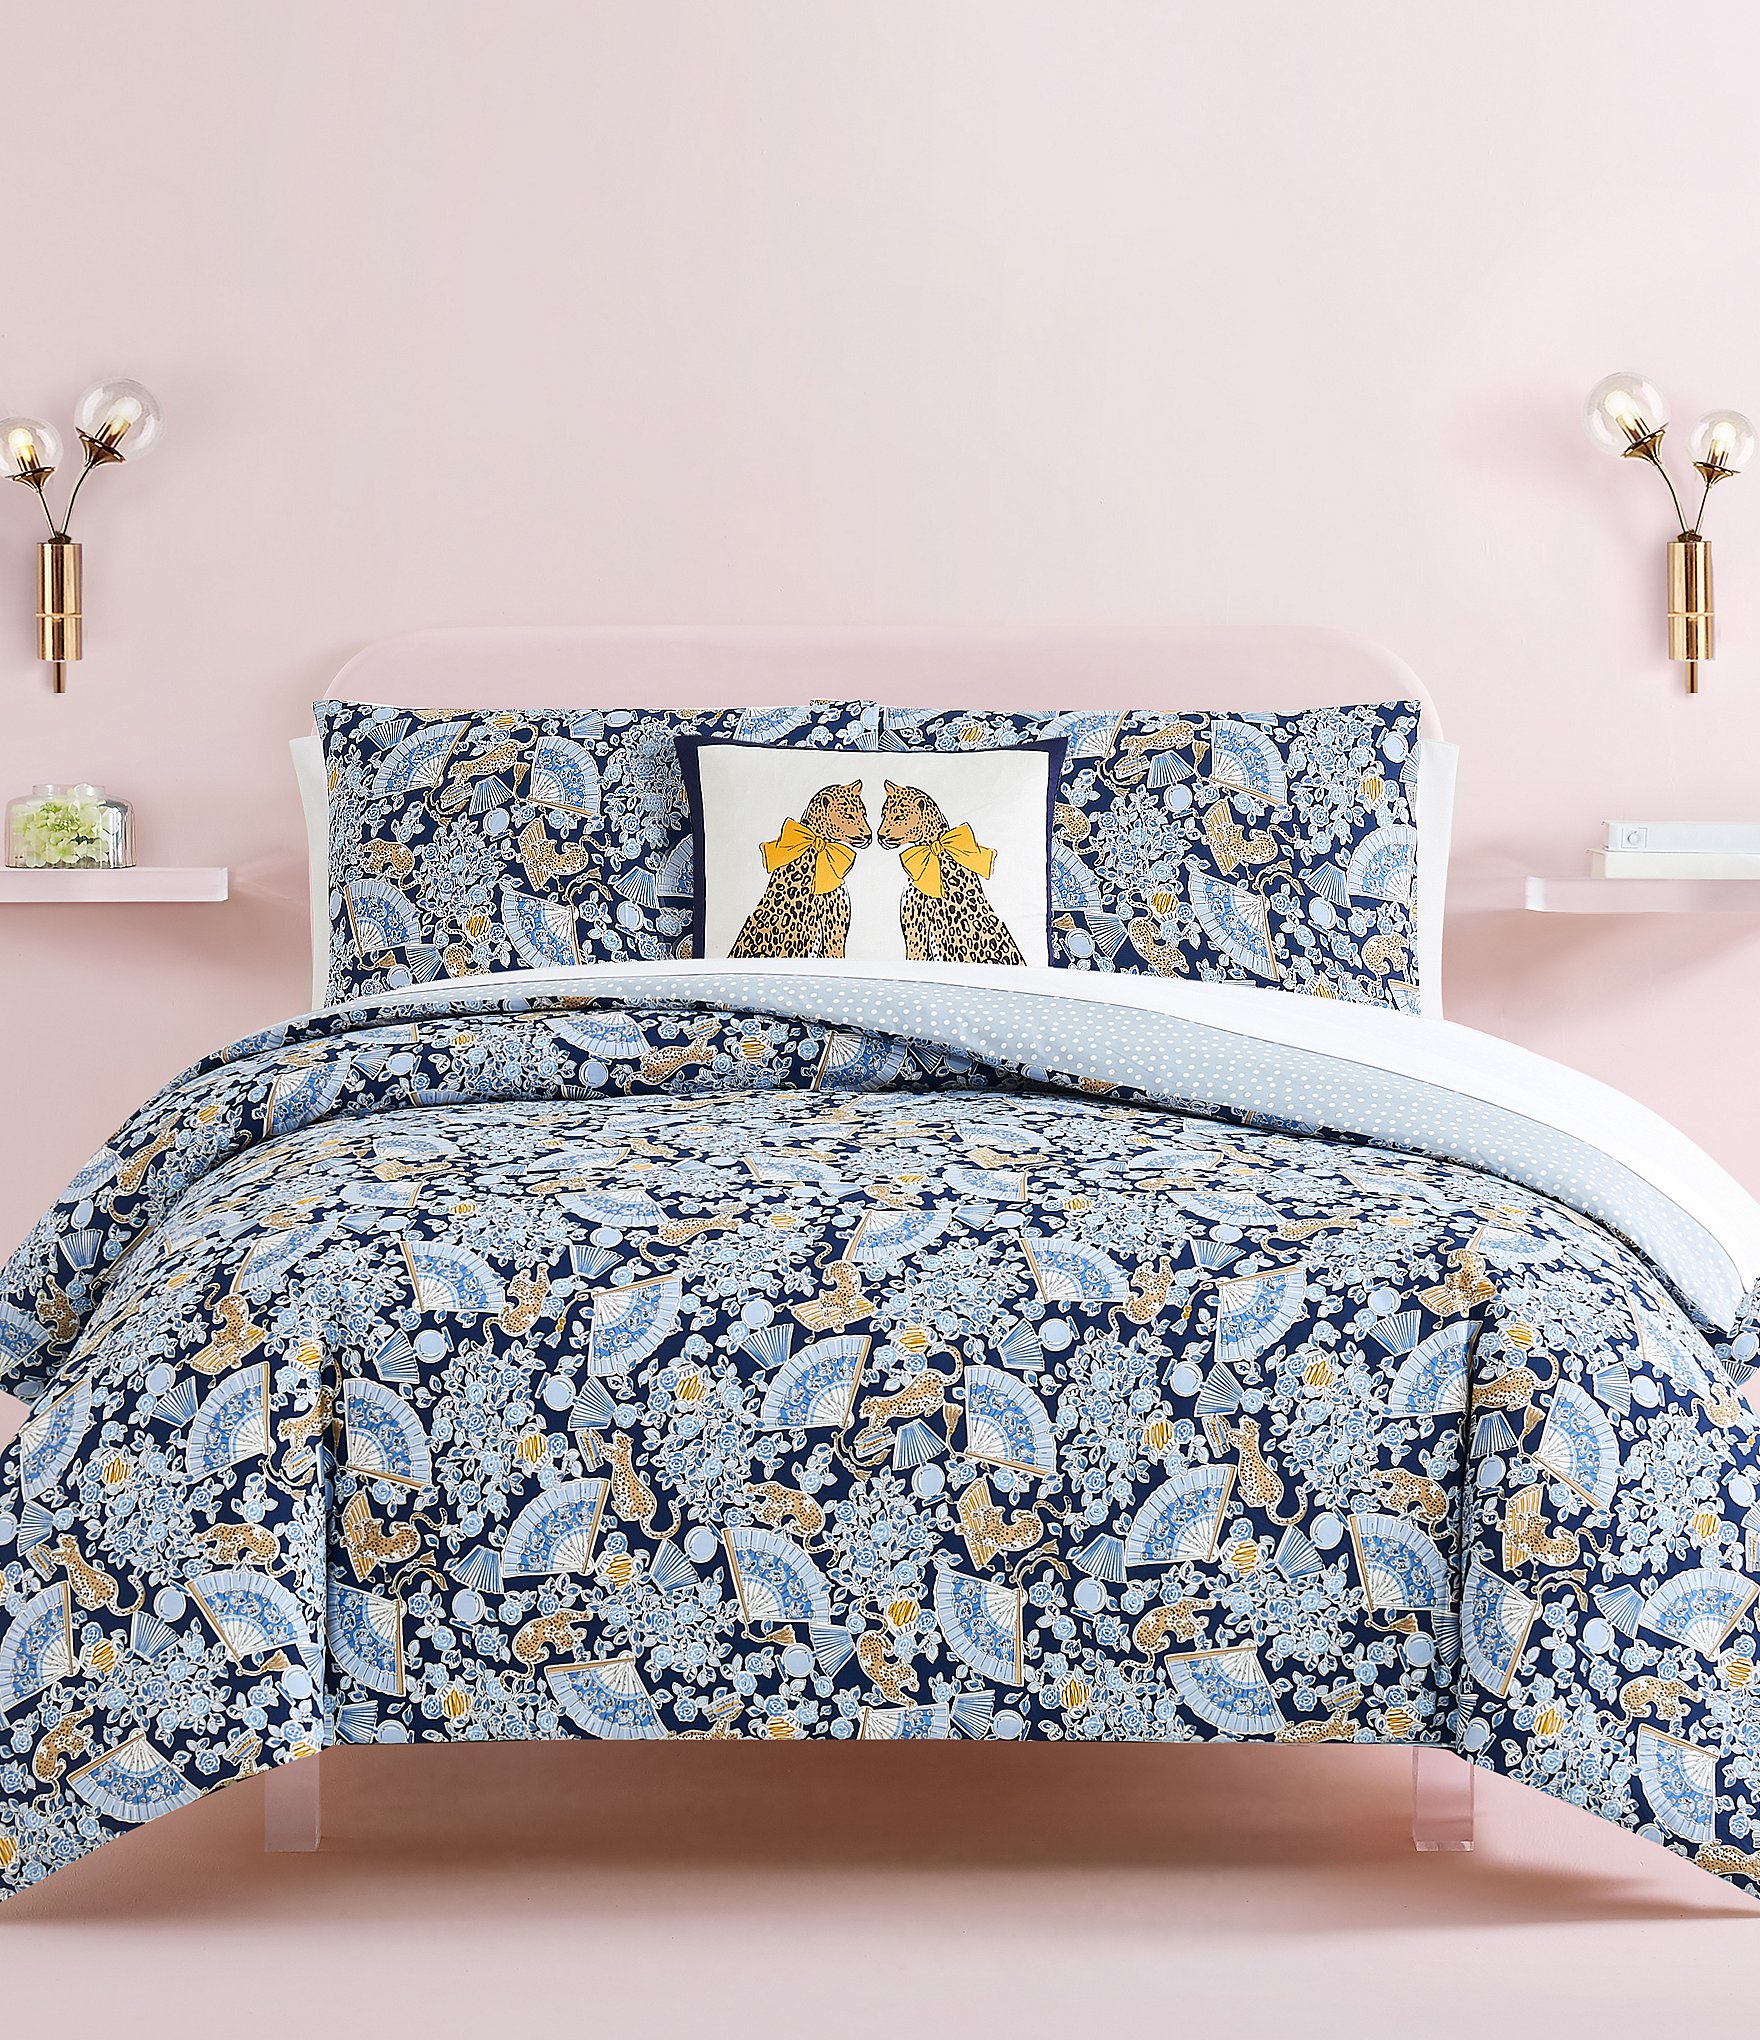 kate spade new york Bedding Collections, Comforters, Quilts, Duvets & Sheets  | Dillard's